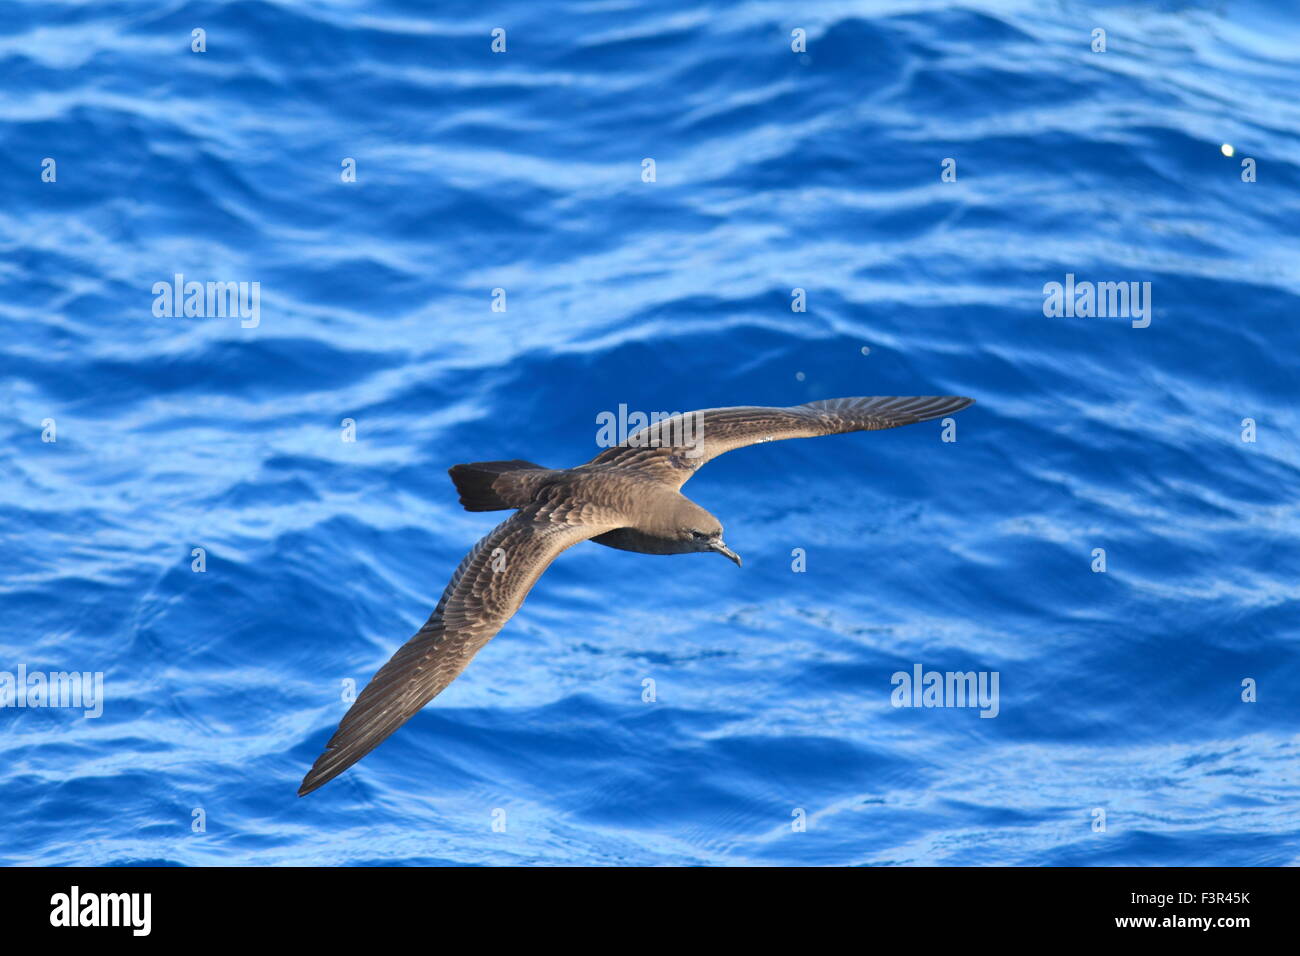 Wedge-tailed Shearwater (Procellaria pacifica) in Australia Stock Photo